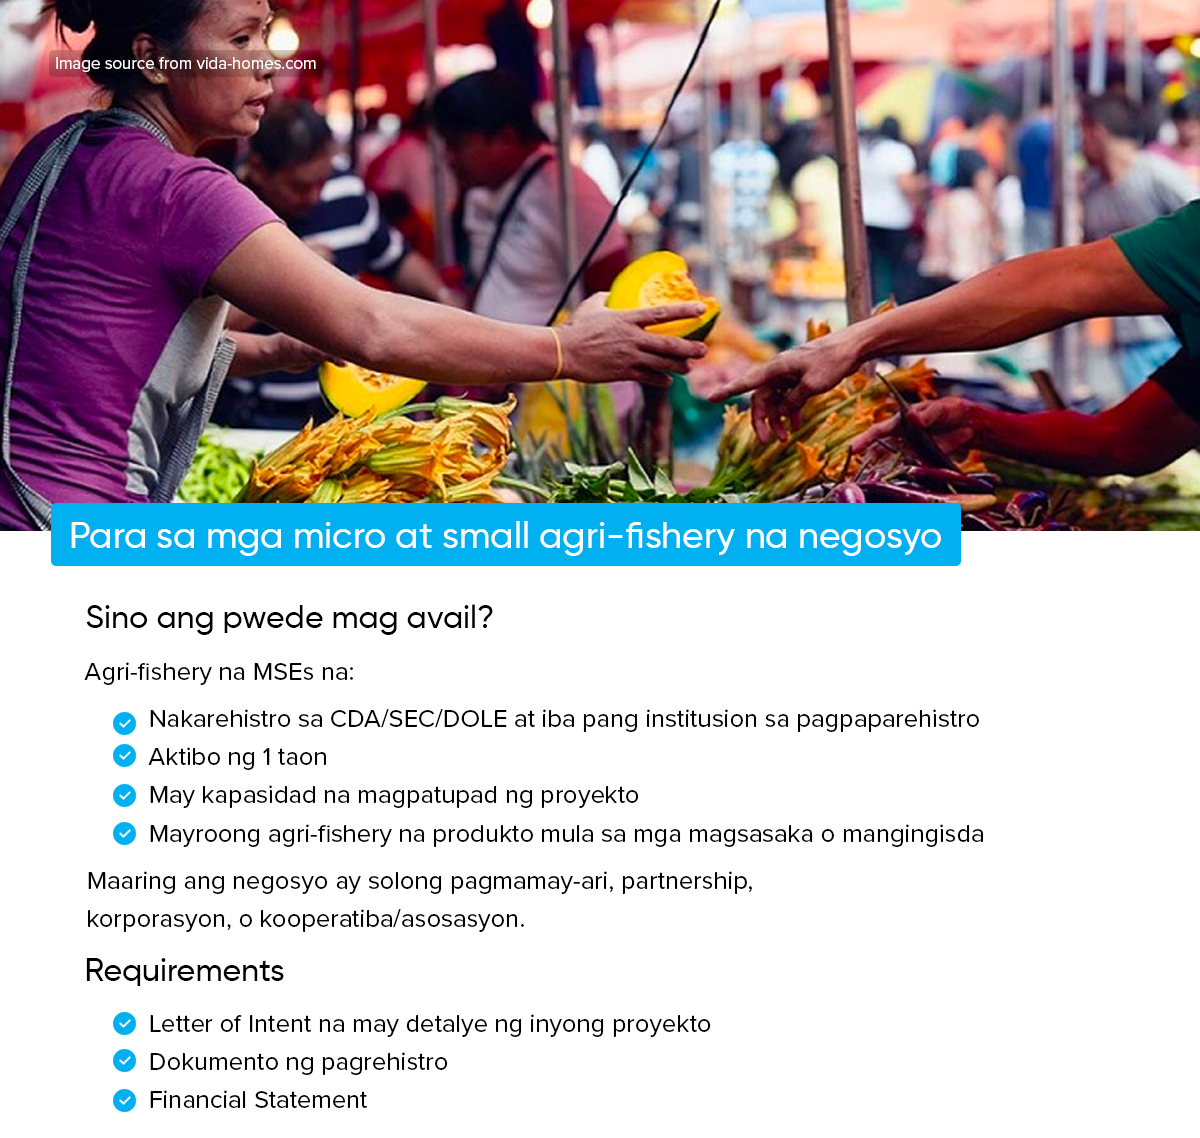 How to Apply for SURE COVID-19 Loan Program for Agri-Fishery Micro and Small Enterprises